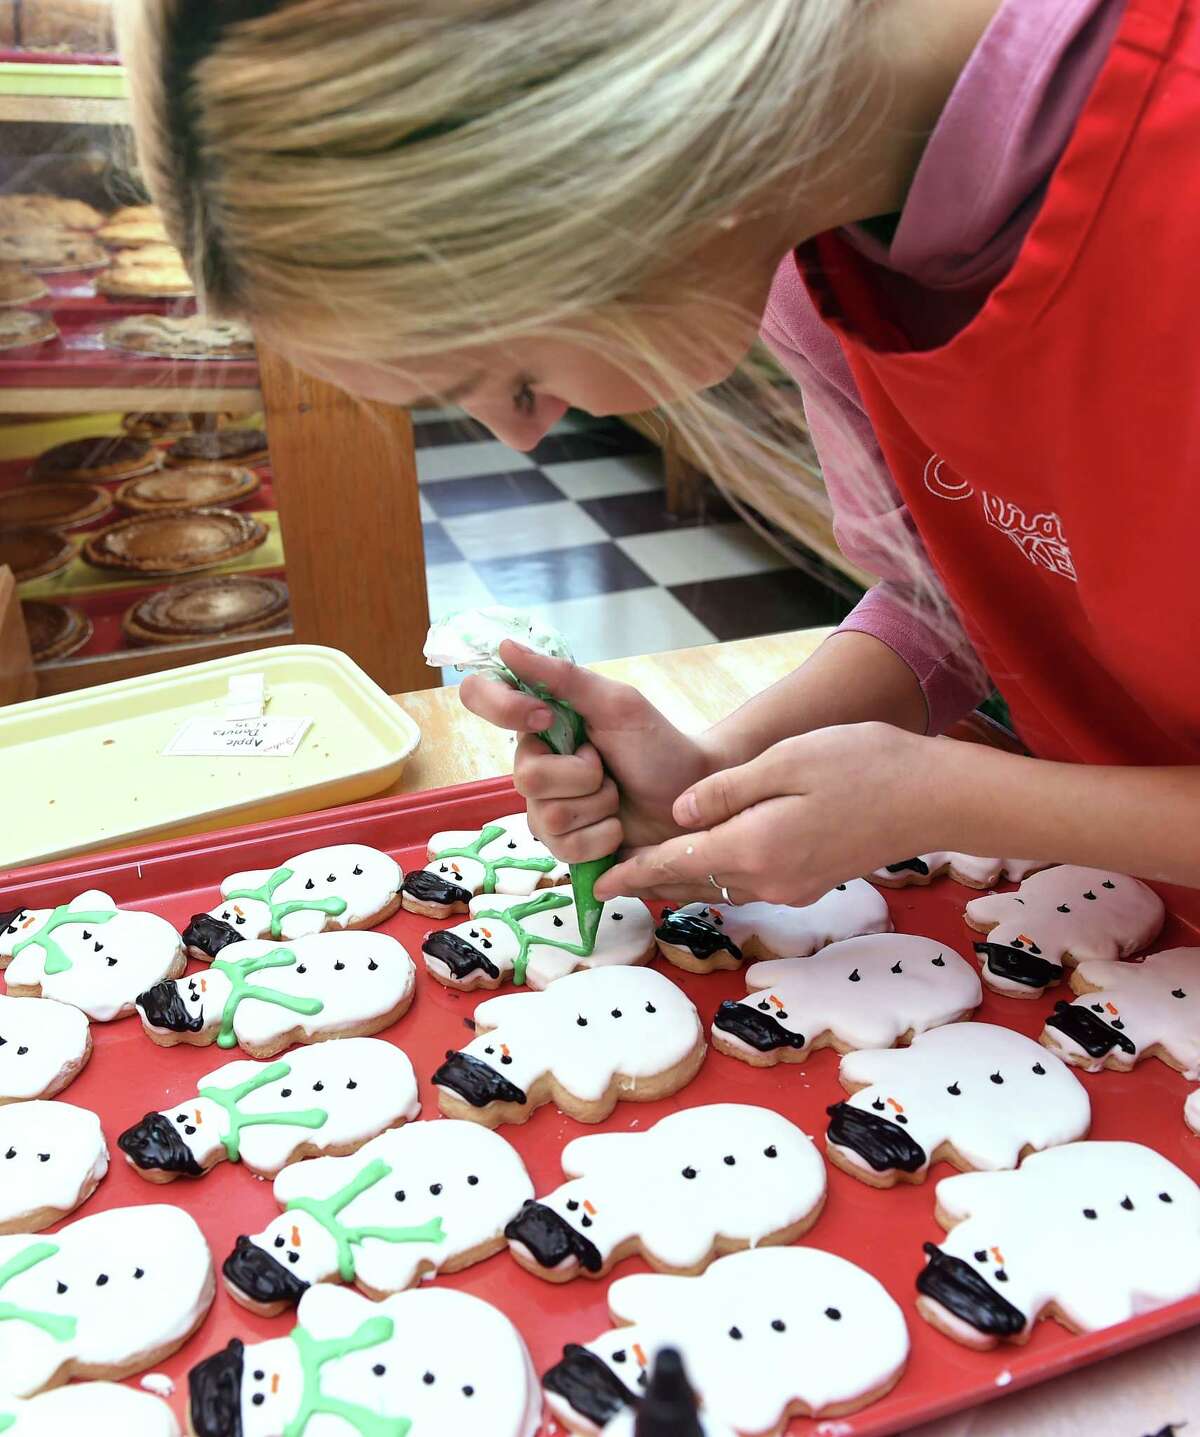 Briana Eagley decorates snowmen sugar cookies with icing at Julia's Bakery in Orange on December 20, 2018. The store sells around 100 dozen of the decorated sugar cookies during the holiday season.